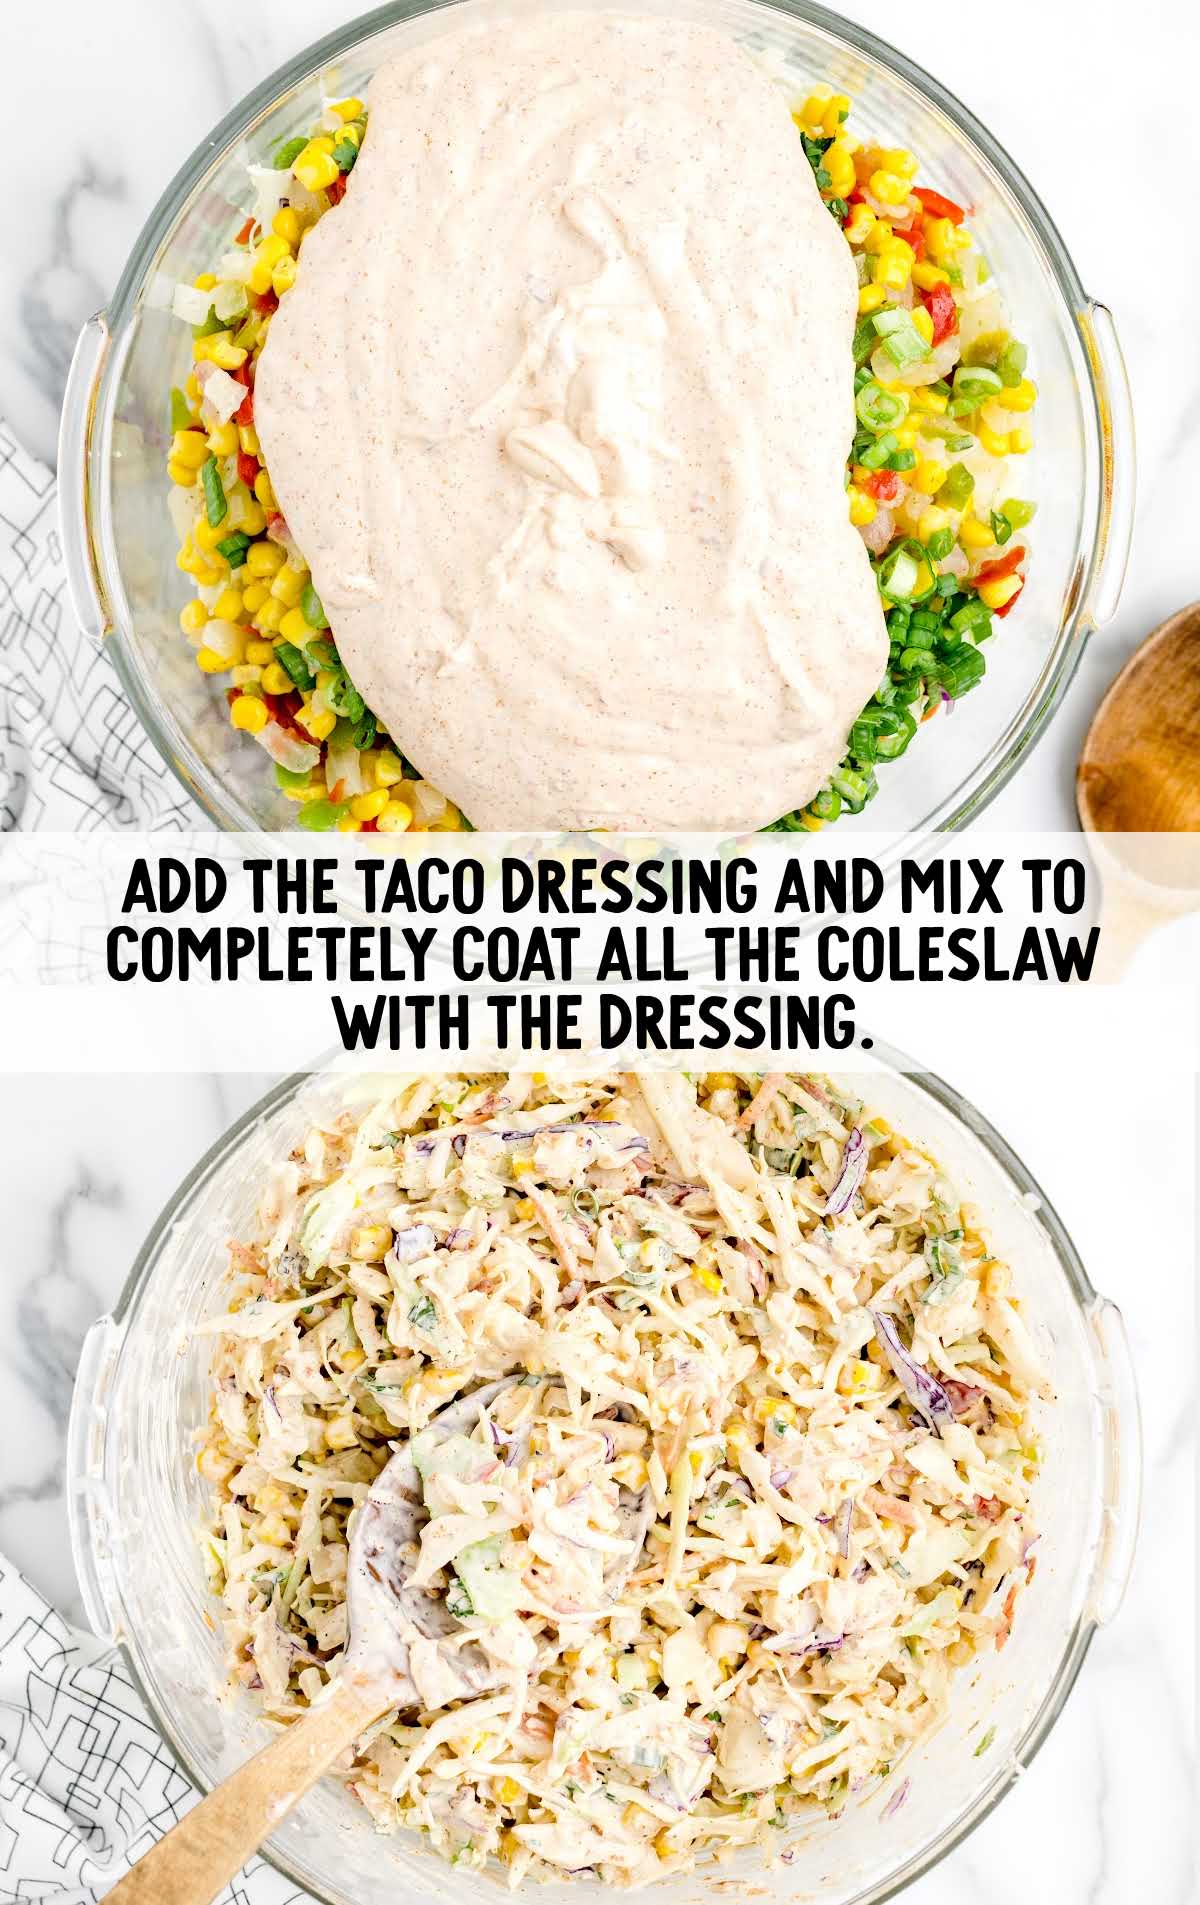 taco dressing added to the coleslaw and mixed in a bowl